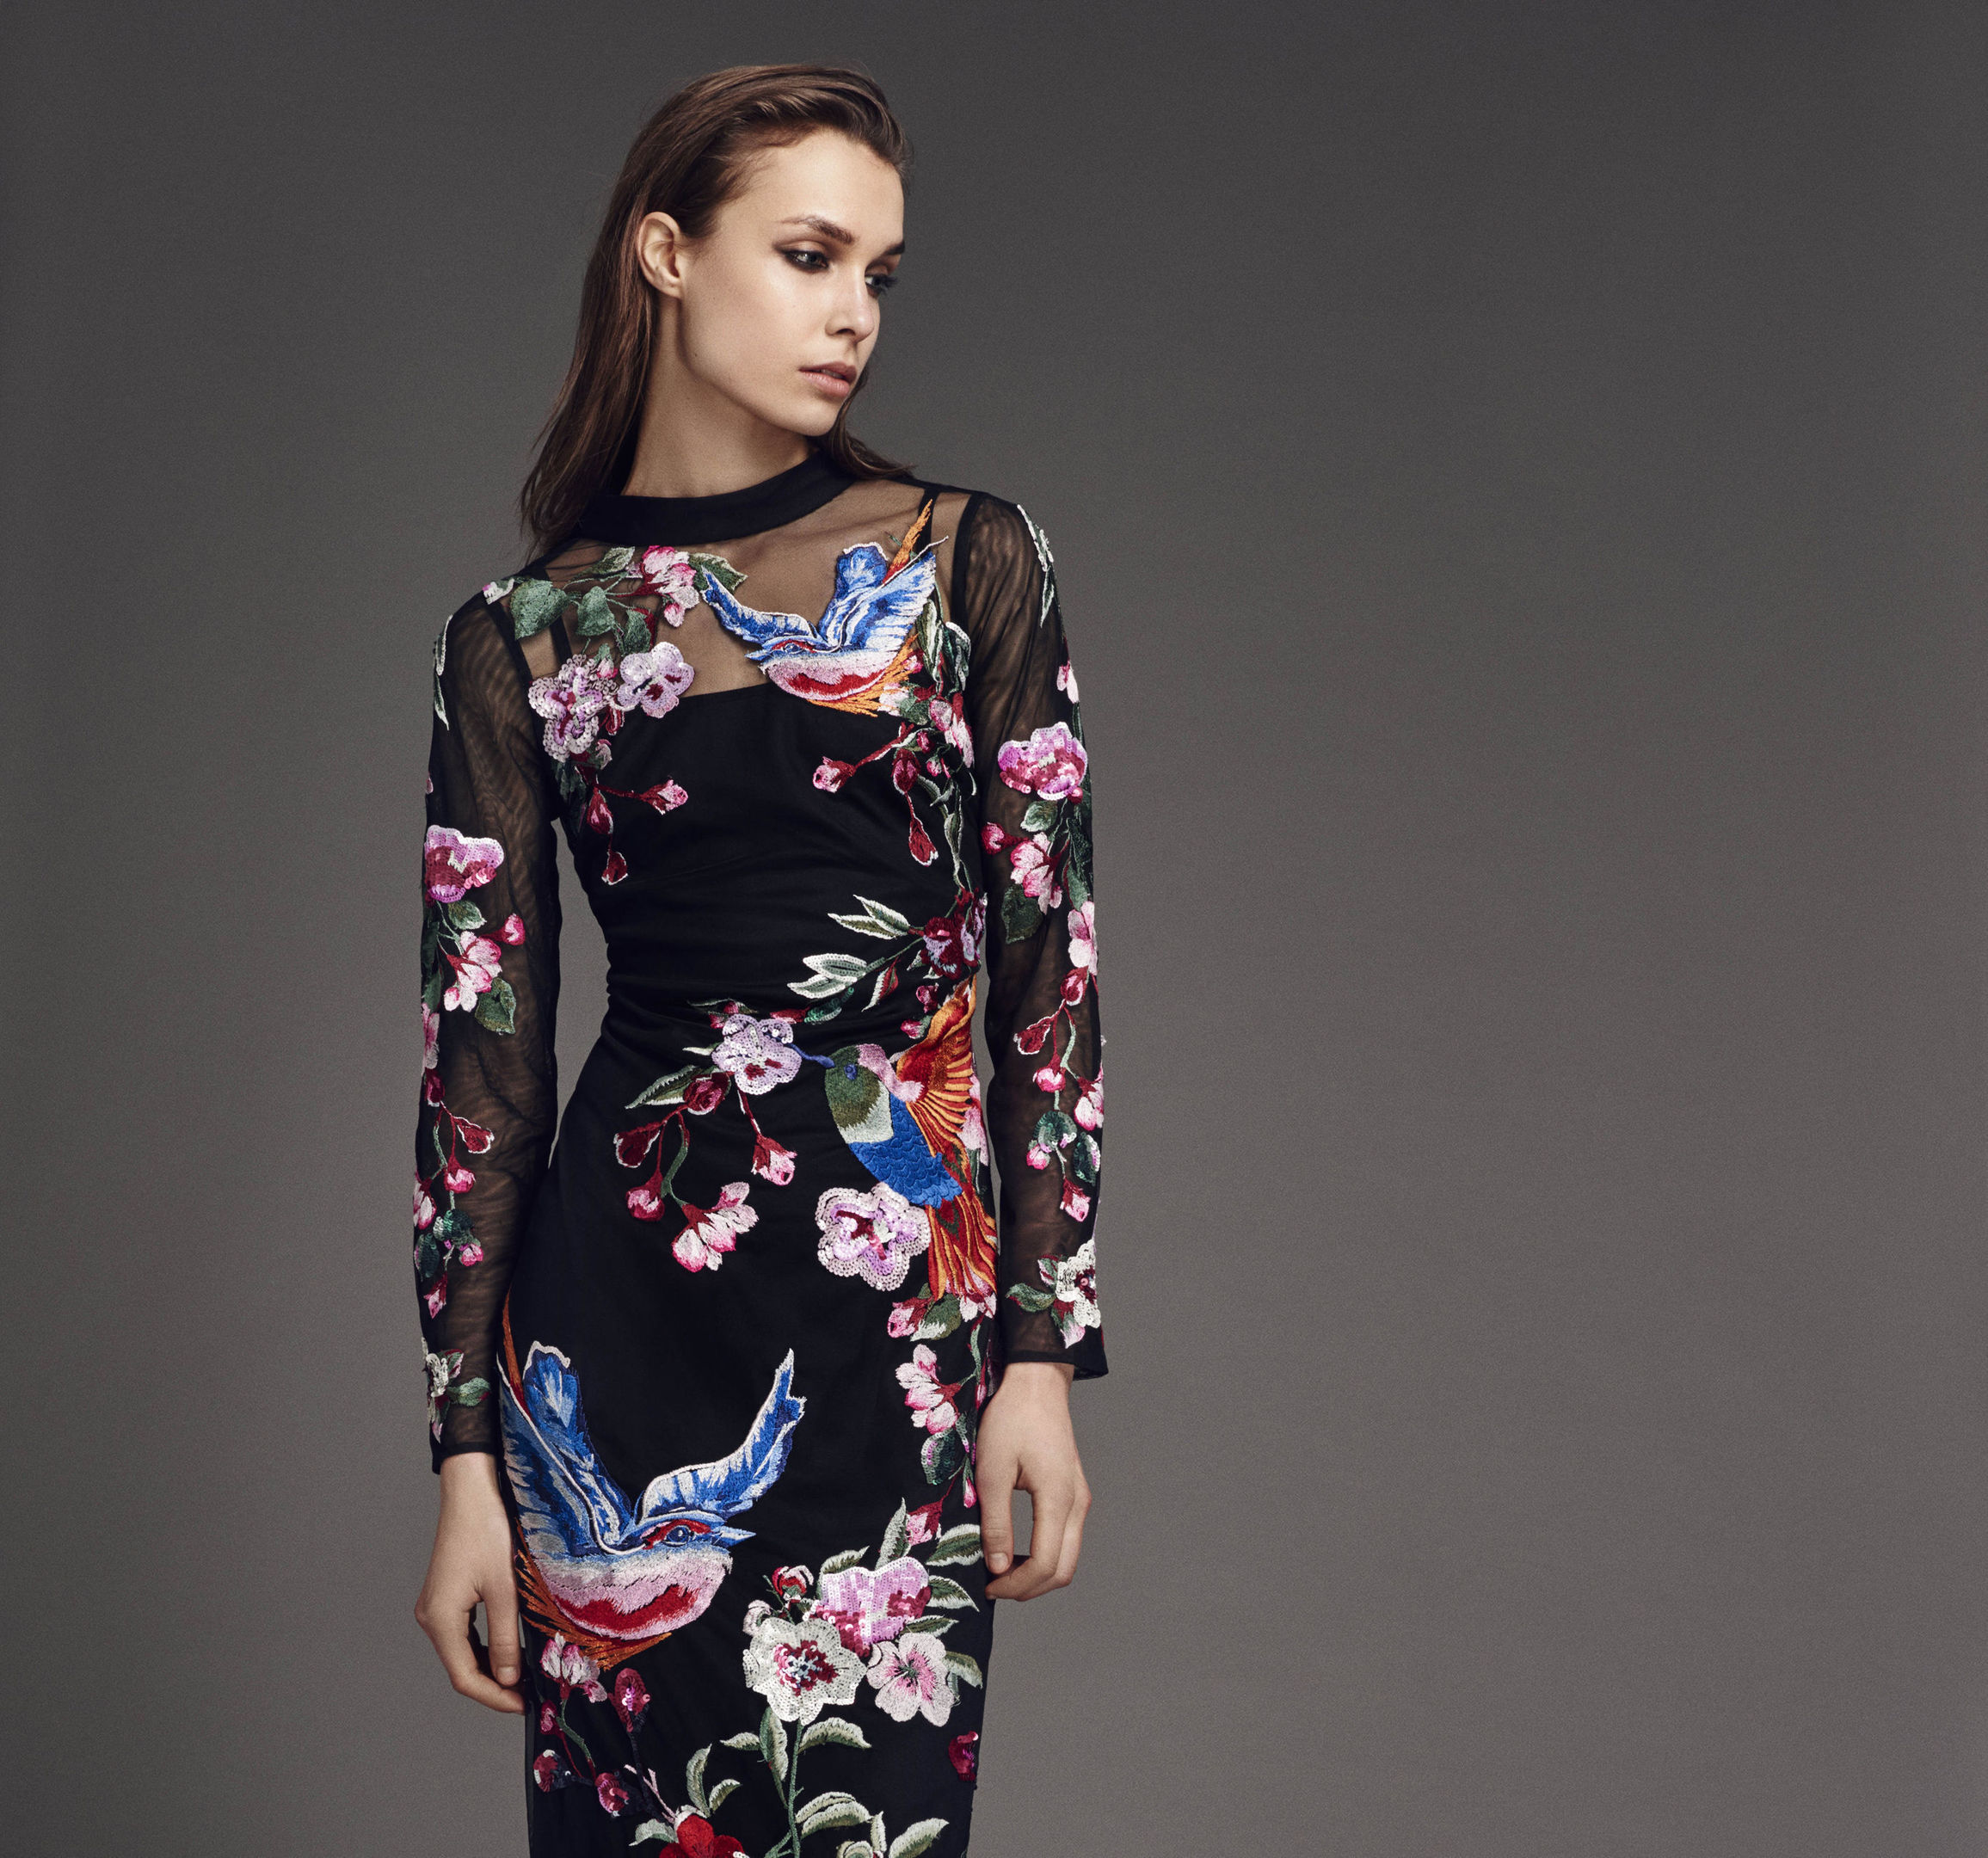 Butterfly by Matthew Williamson Black Winter Bird Embroidered Shift Dress, available from debenhams.com. 